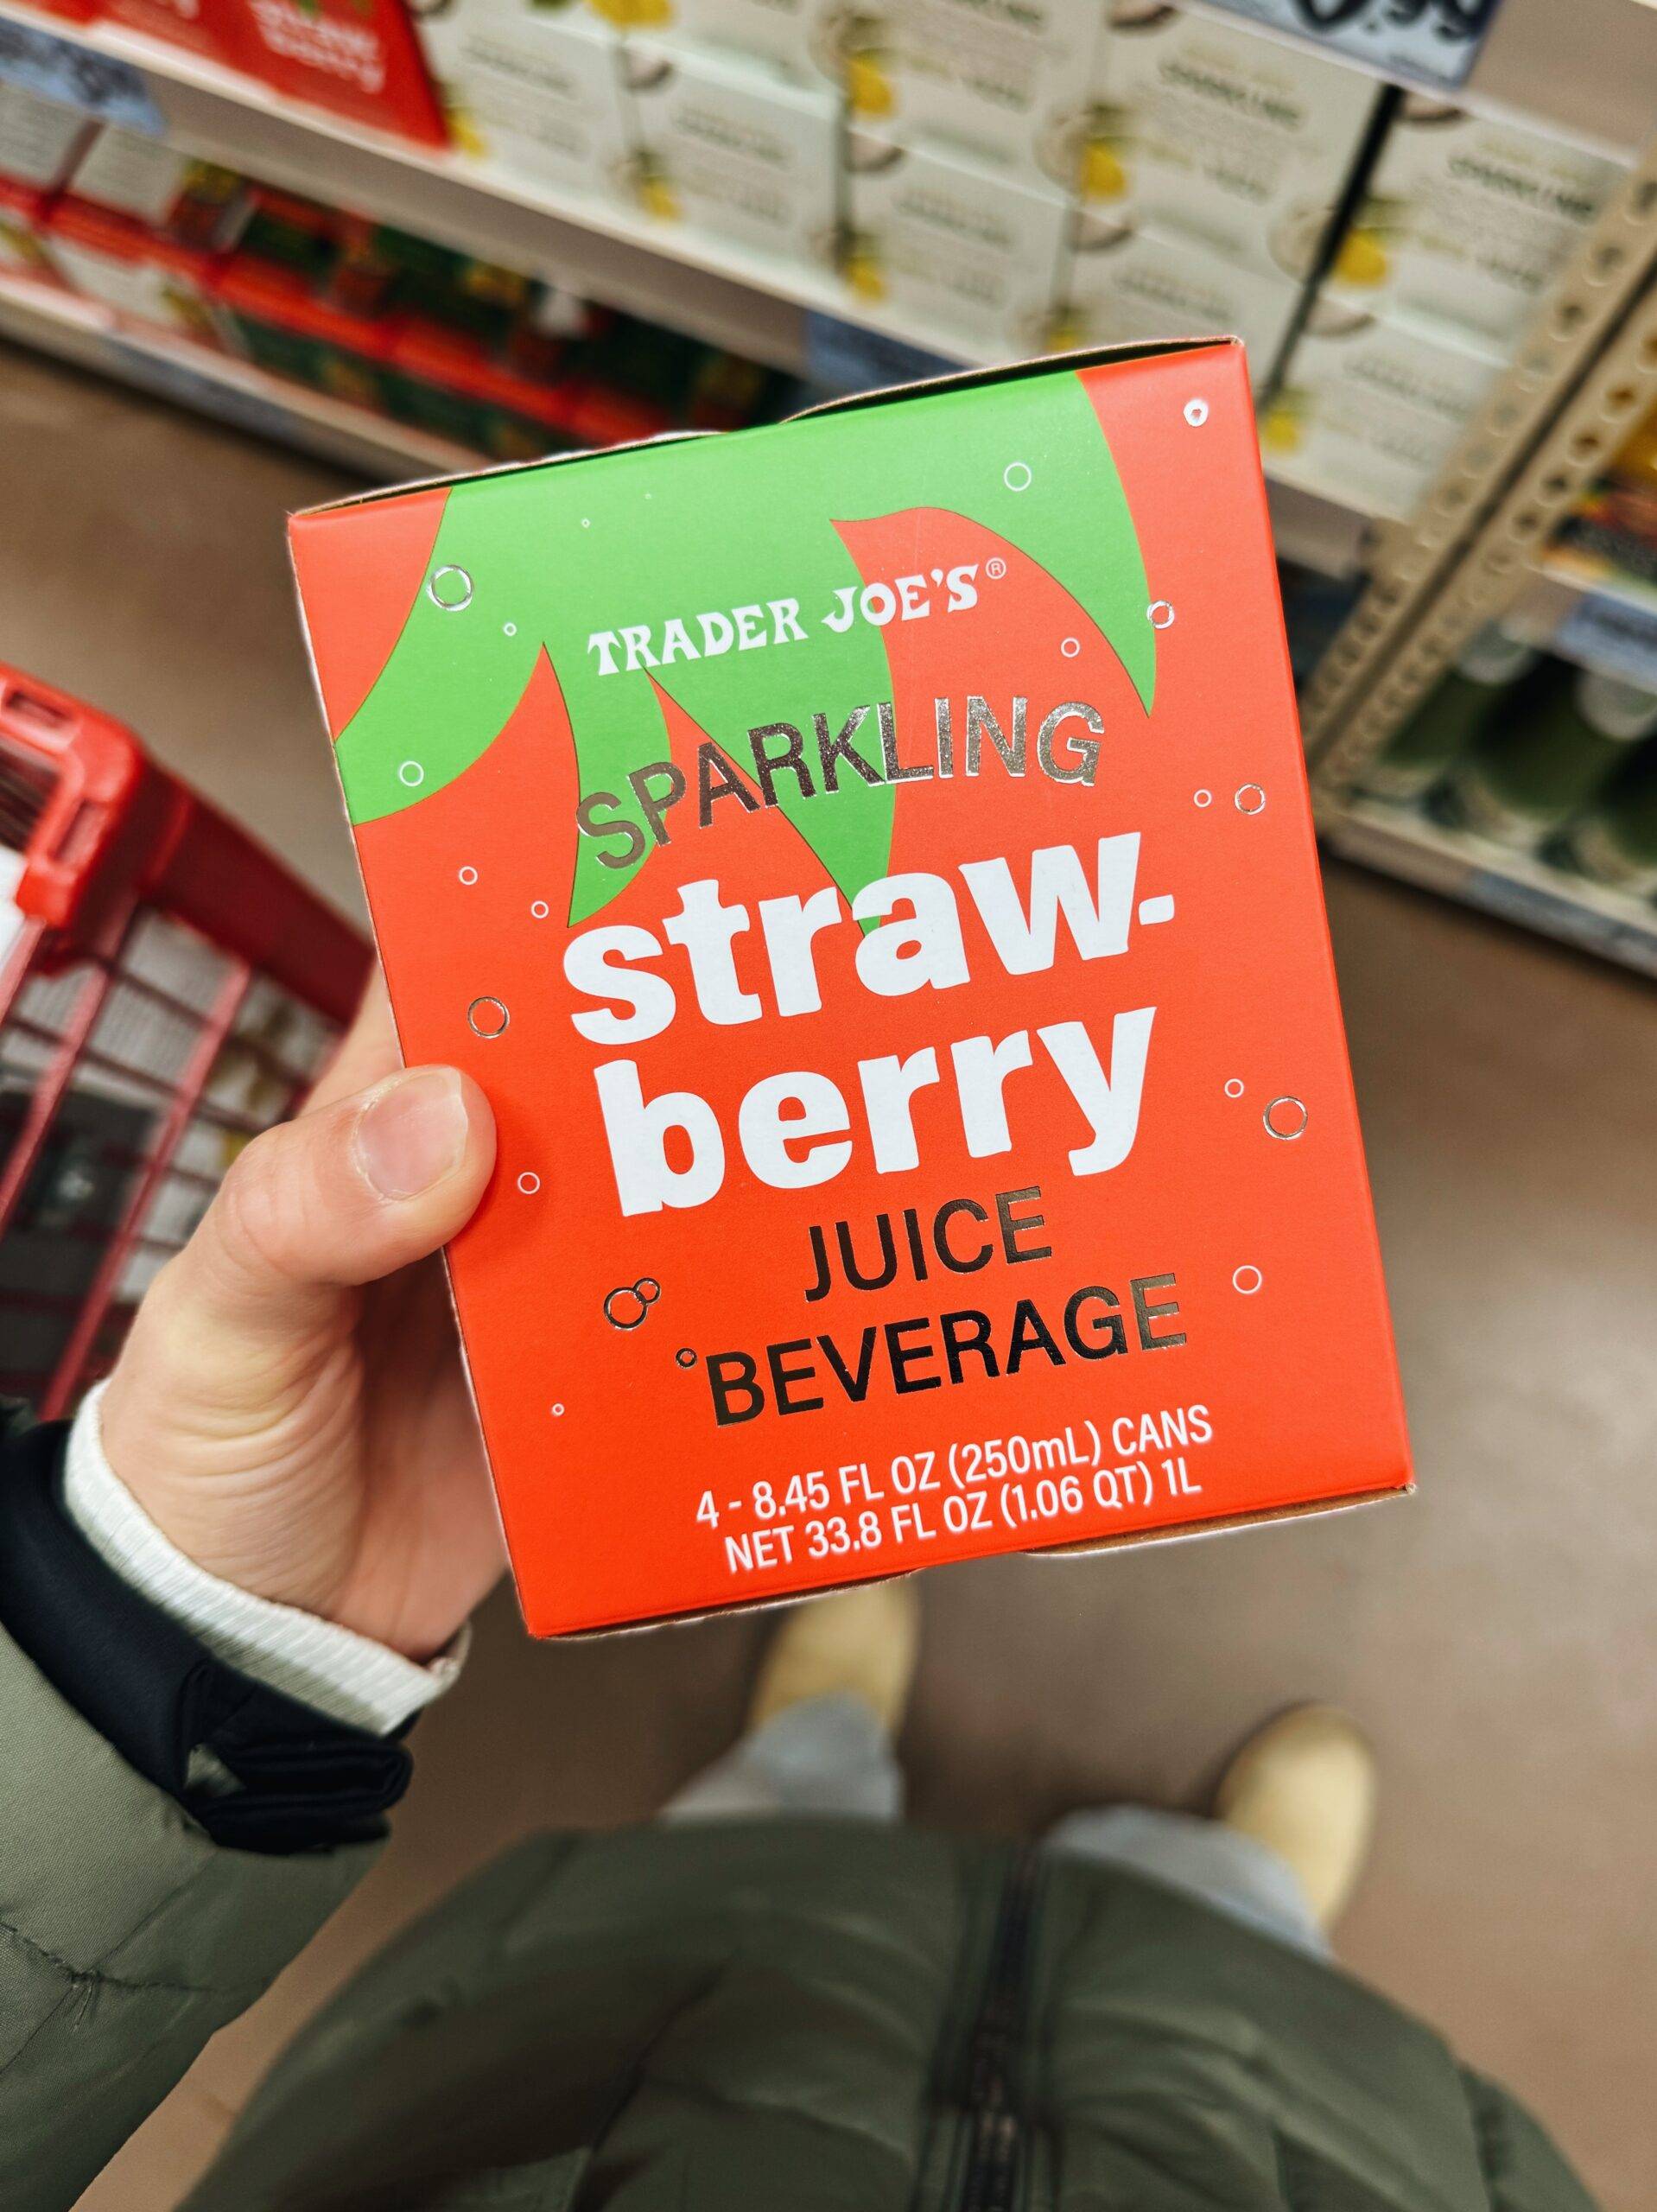 Sparkling strawberry juice in a package.